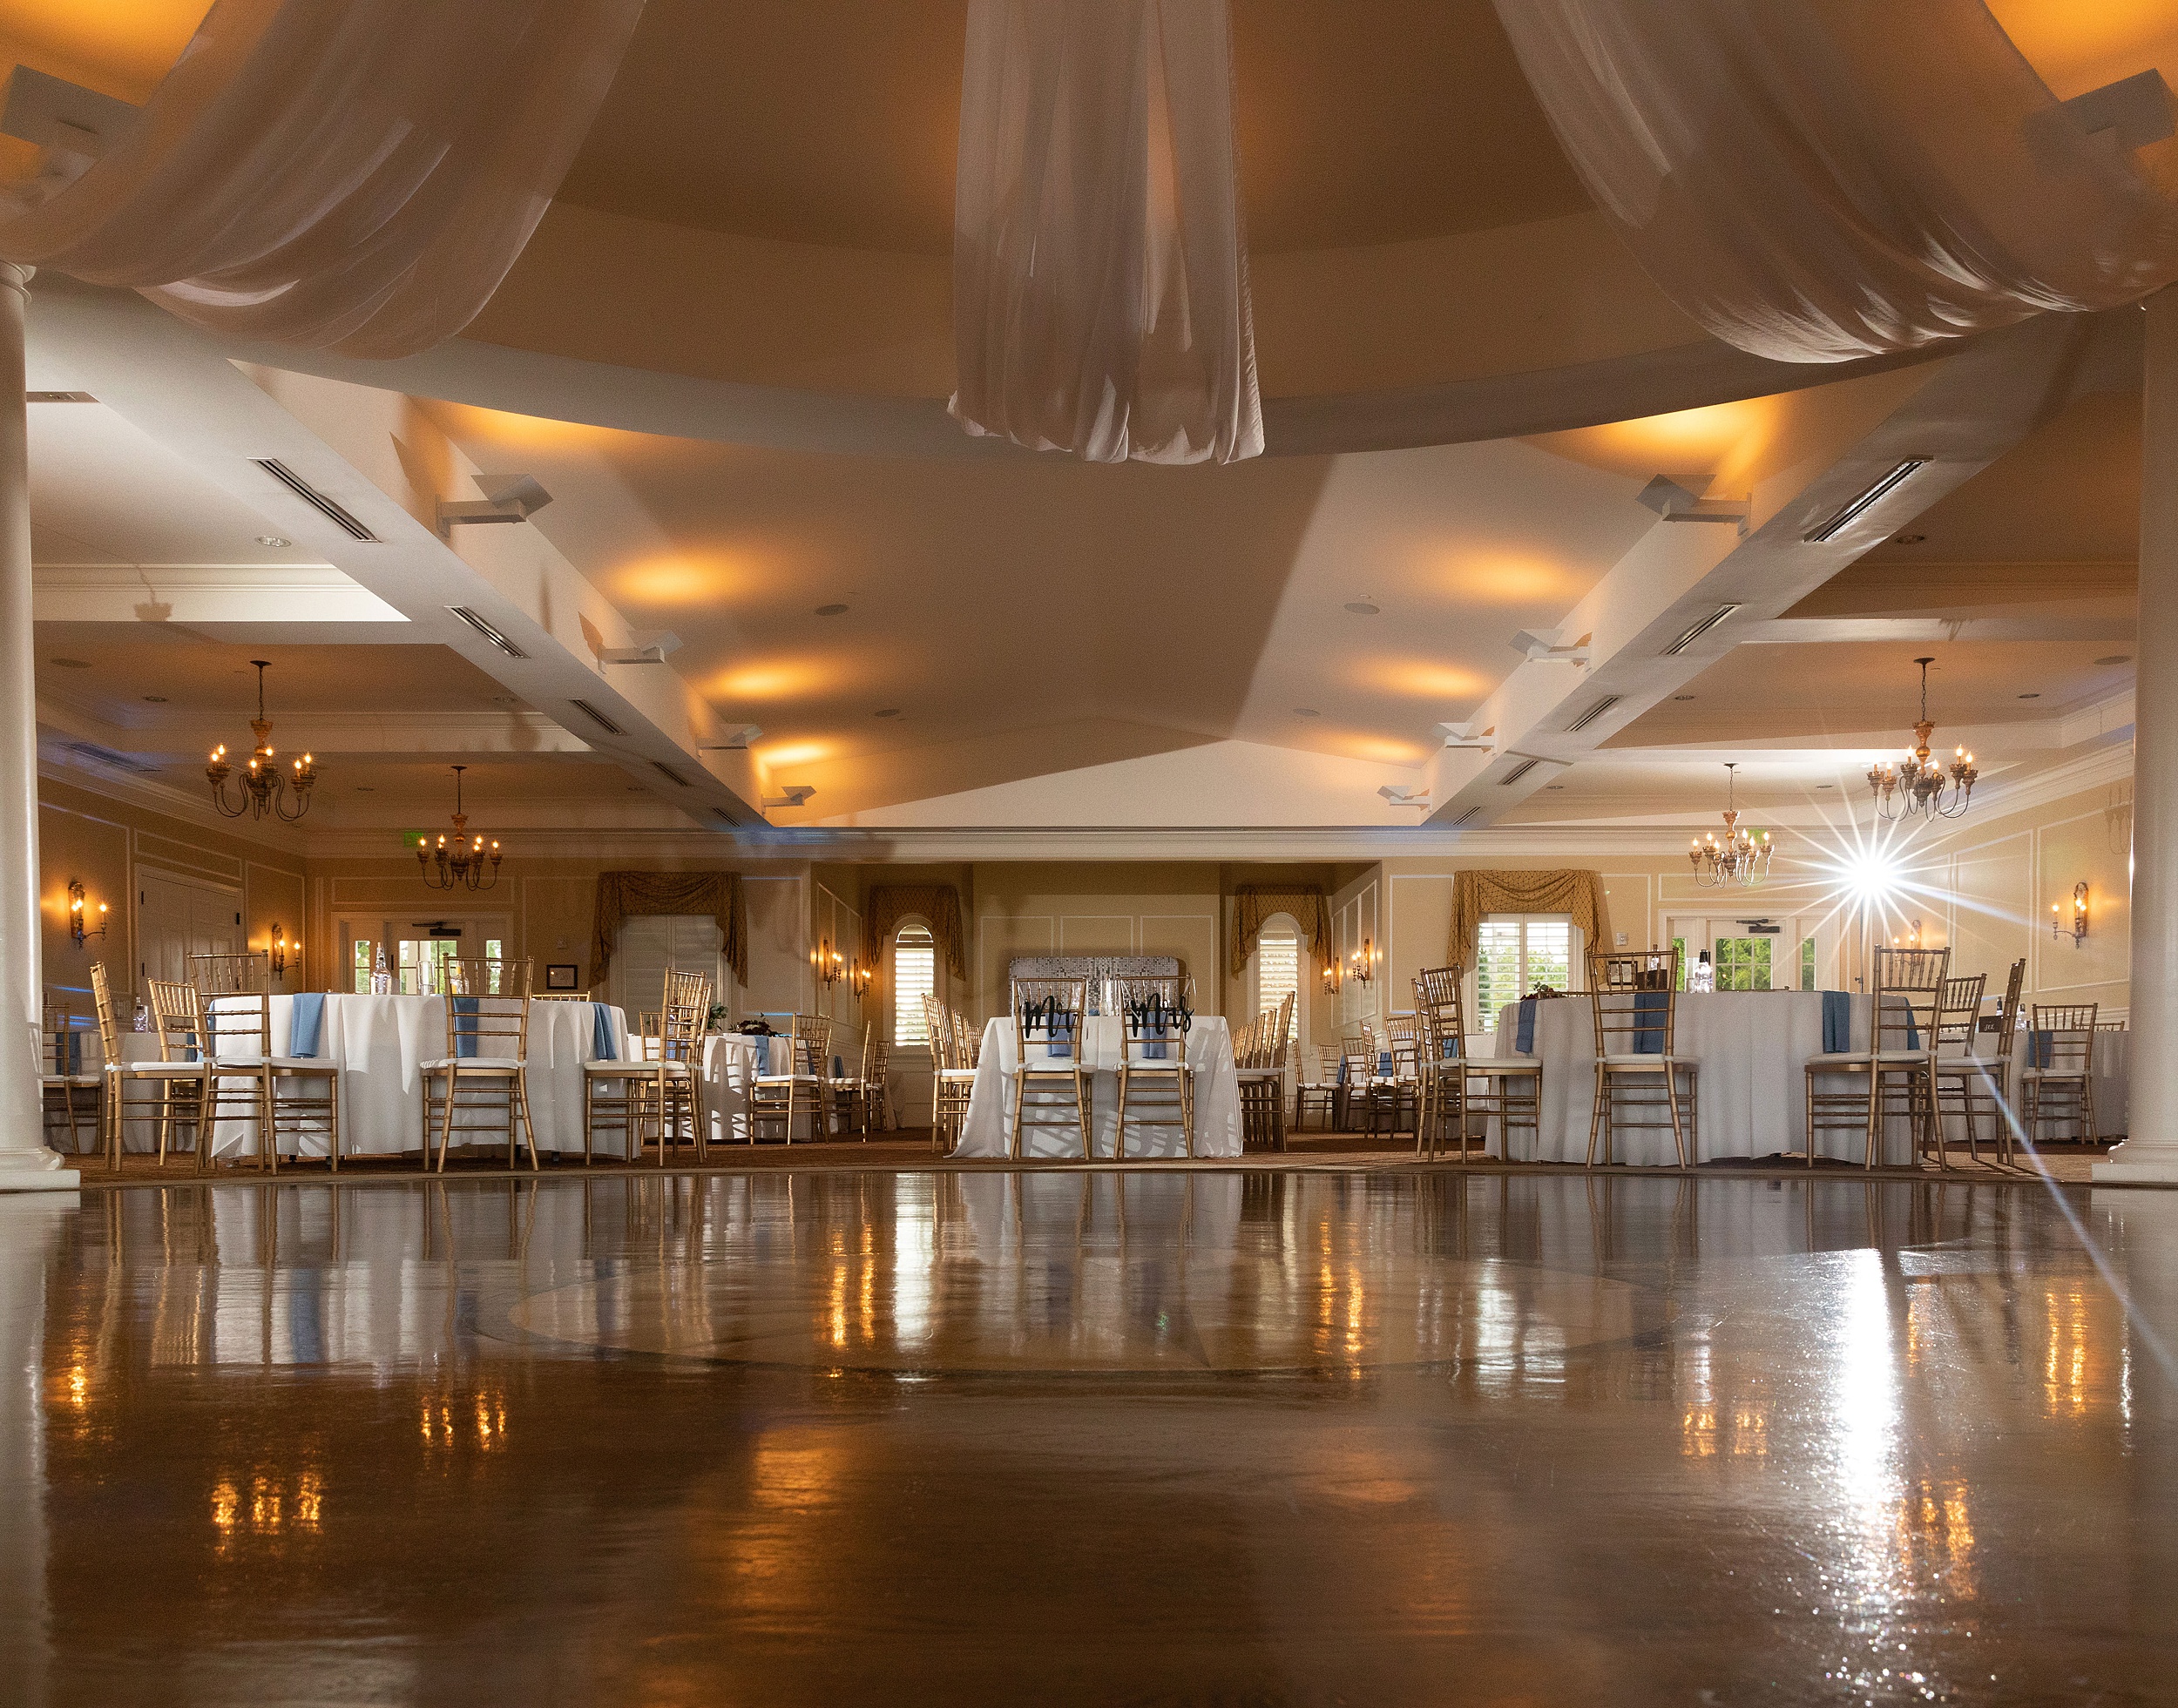 Details of a river house events wedding reception set up with gold chairs and white linens